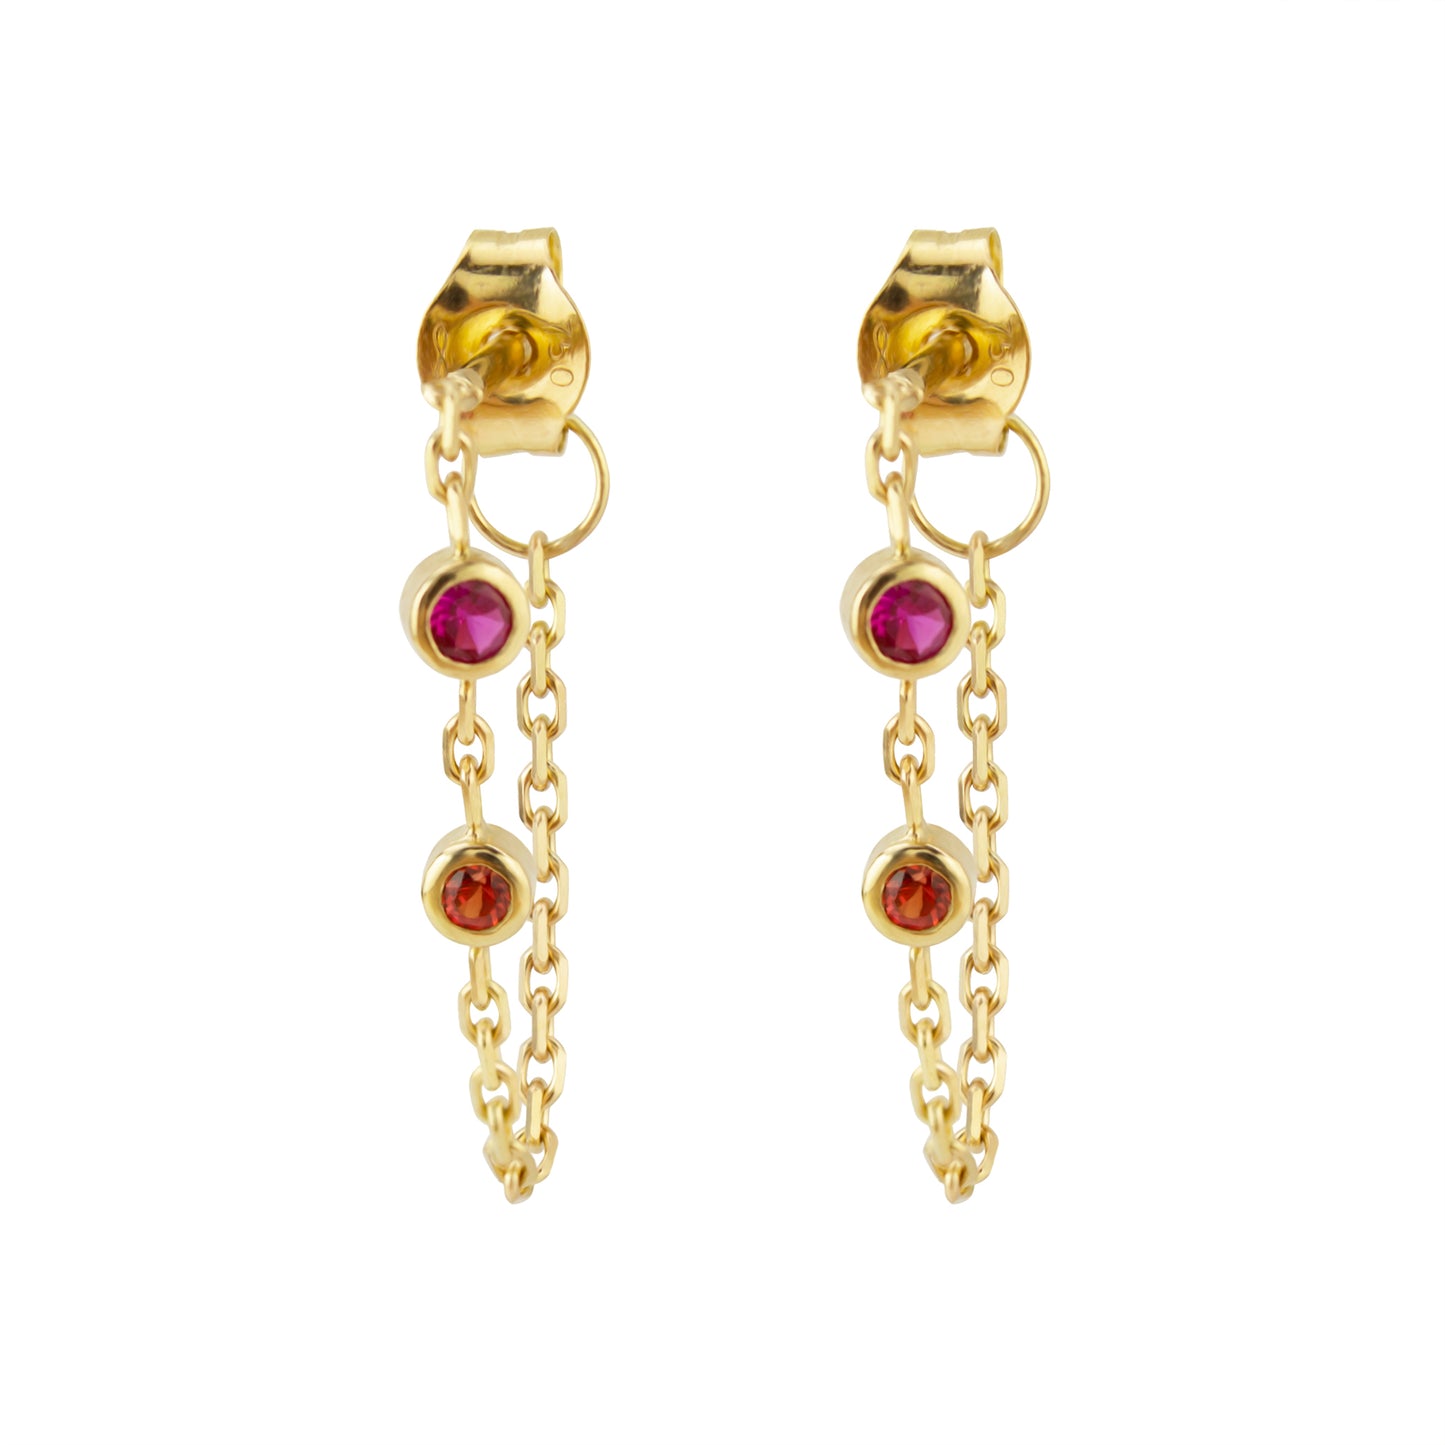 CANDY SAPPHIRE EARRING - MAGENTA AND SCARLET SAPPHIRE - Irena Chmura Jewellery